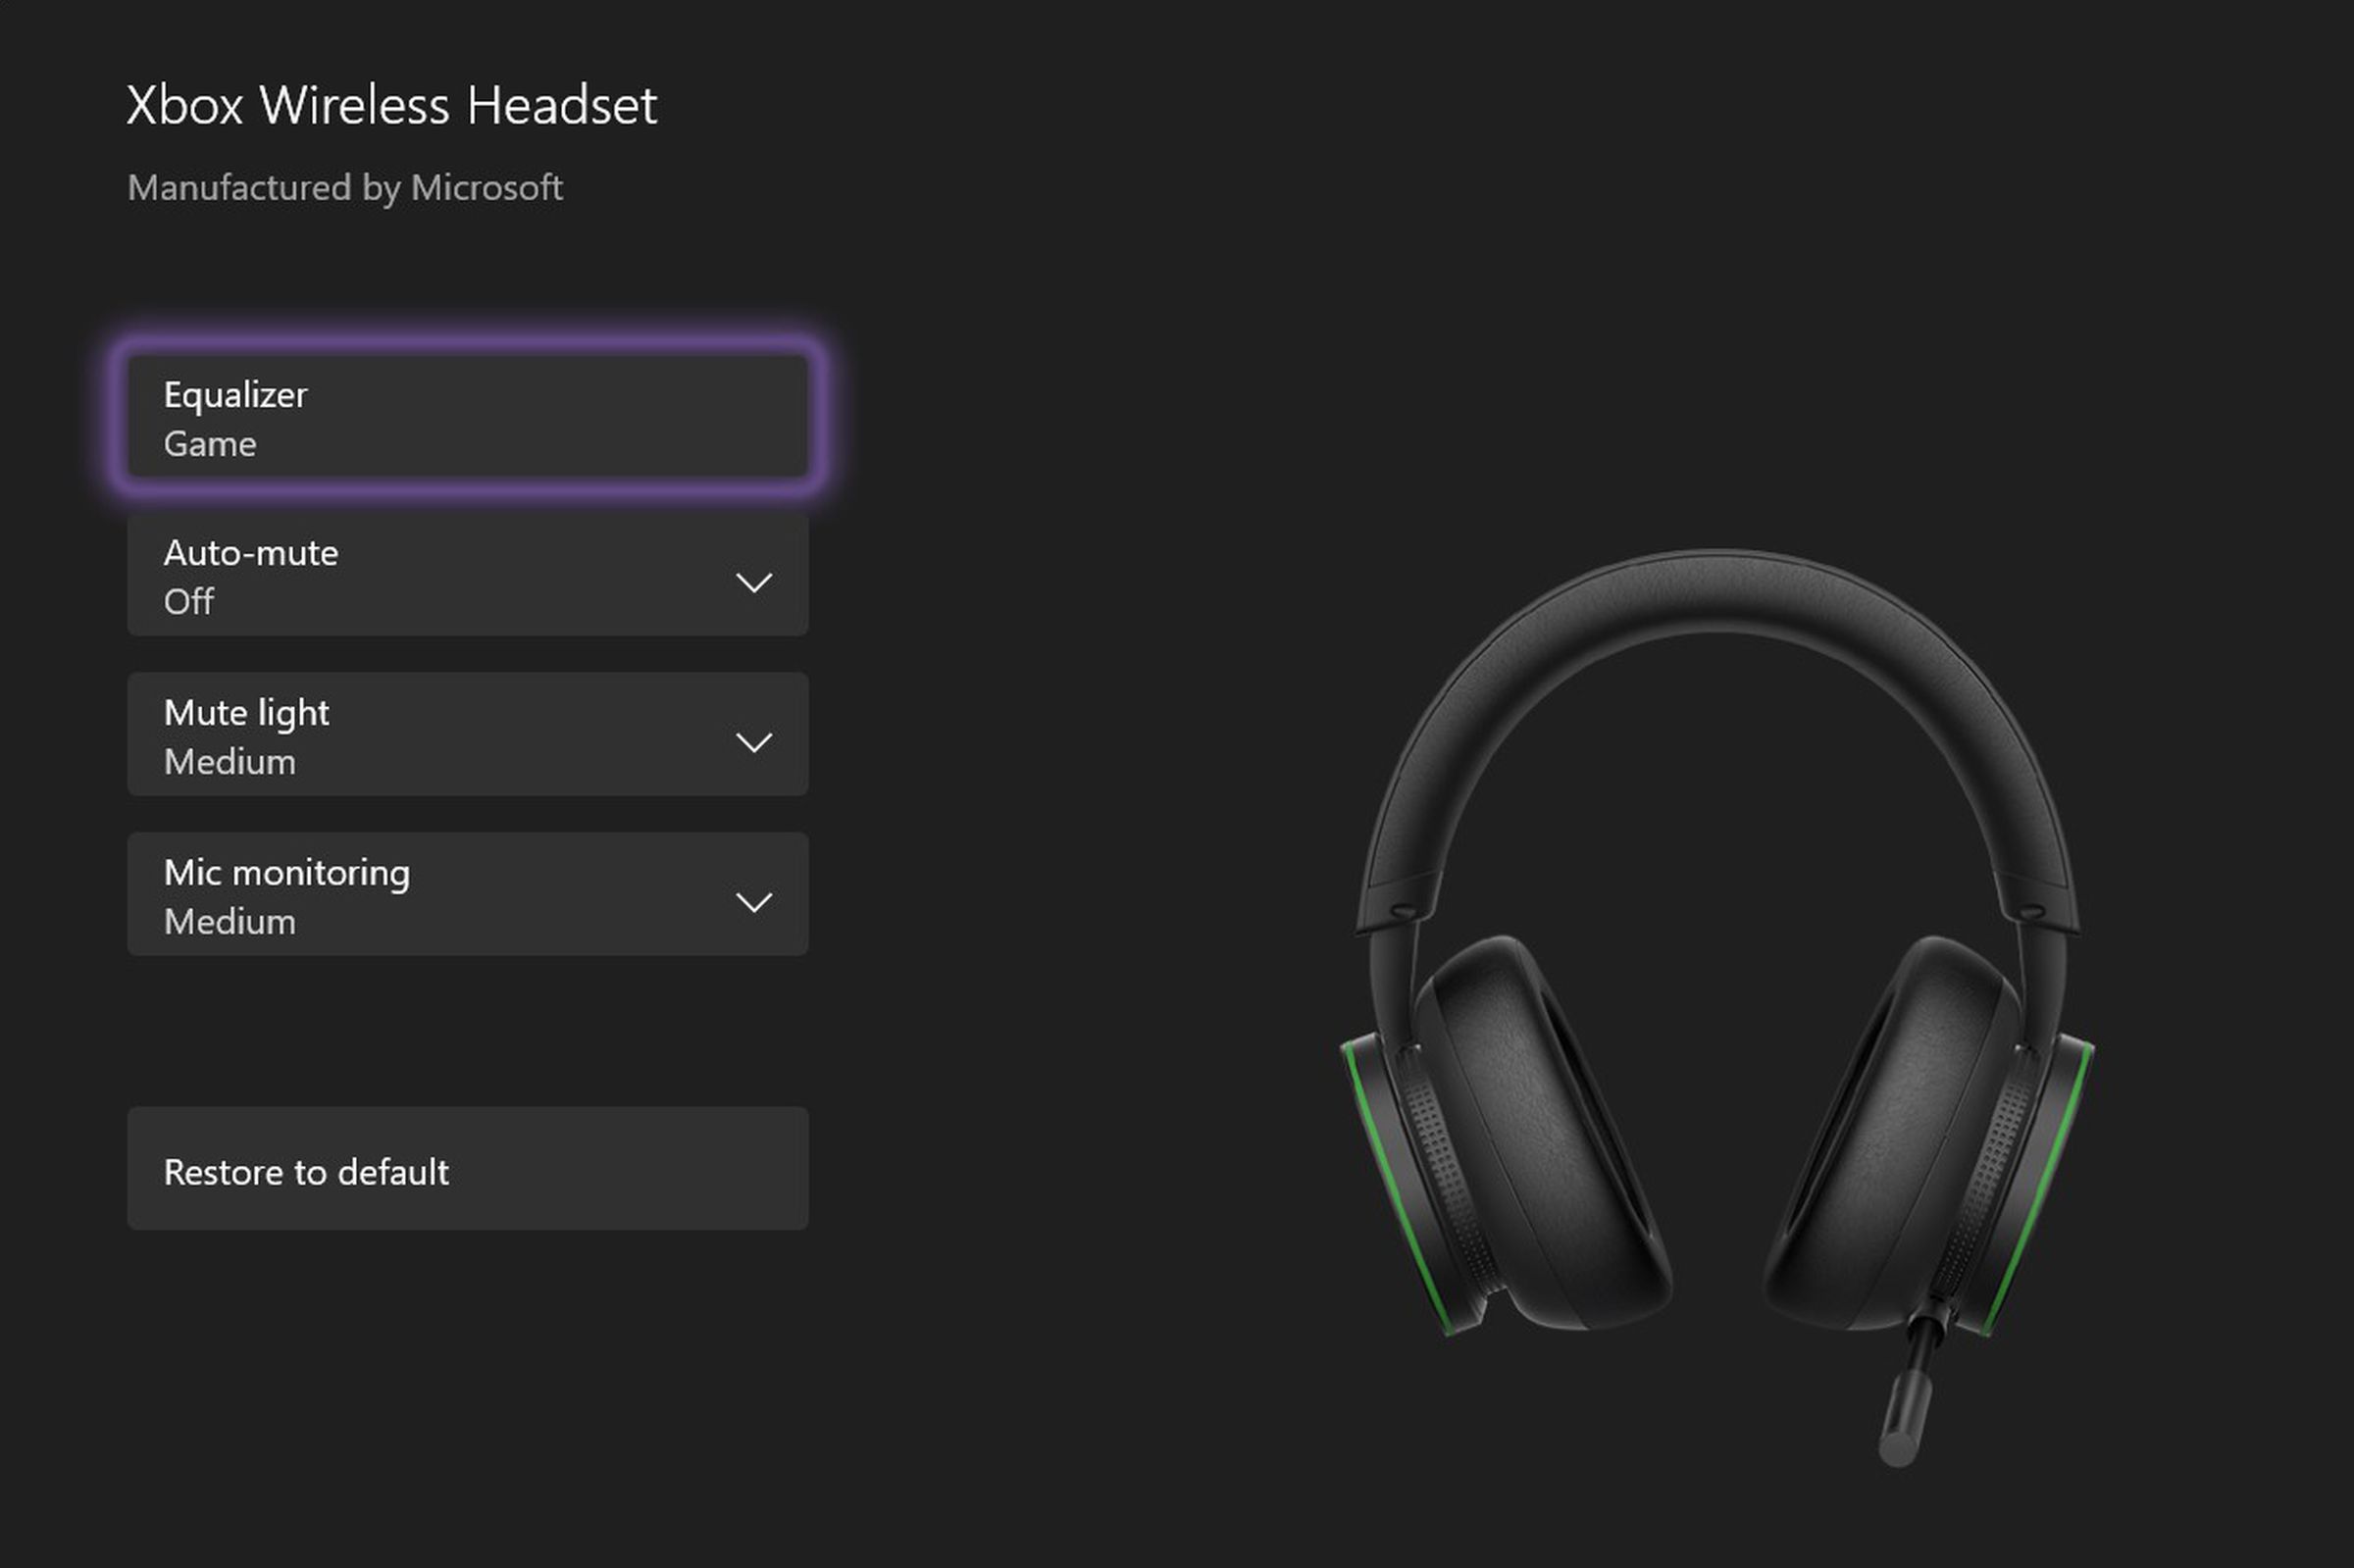 The Xbox Accessories app on PC and Xbox lets you fine-tune adjustments.